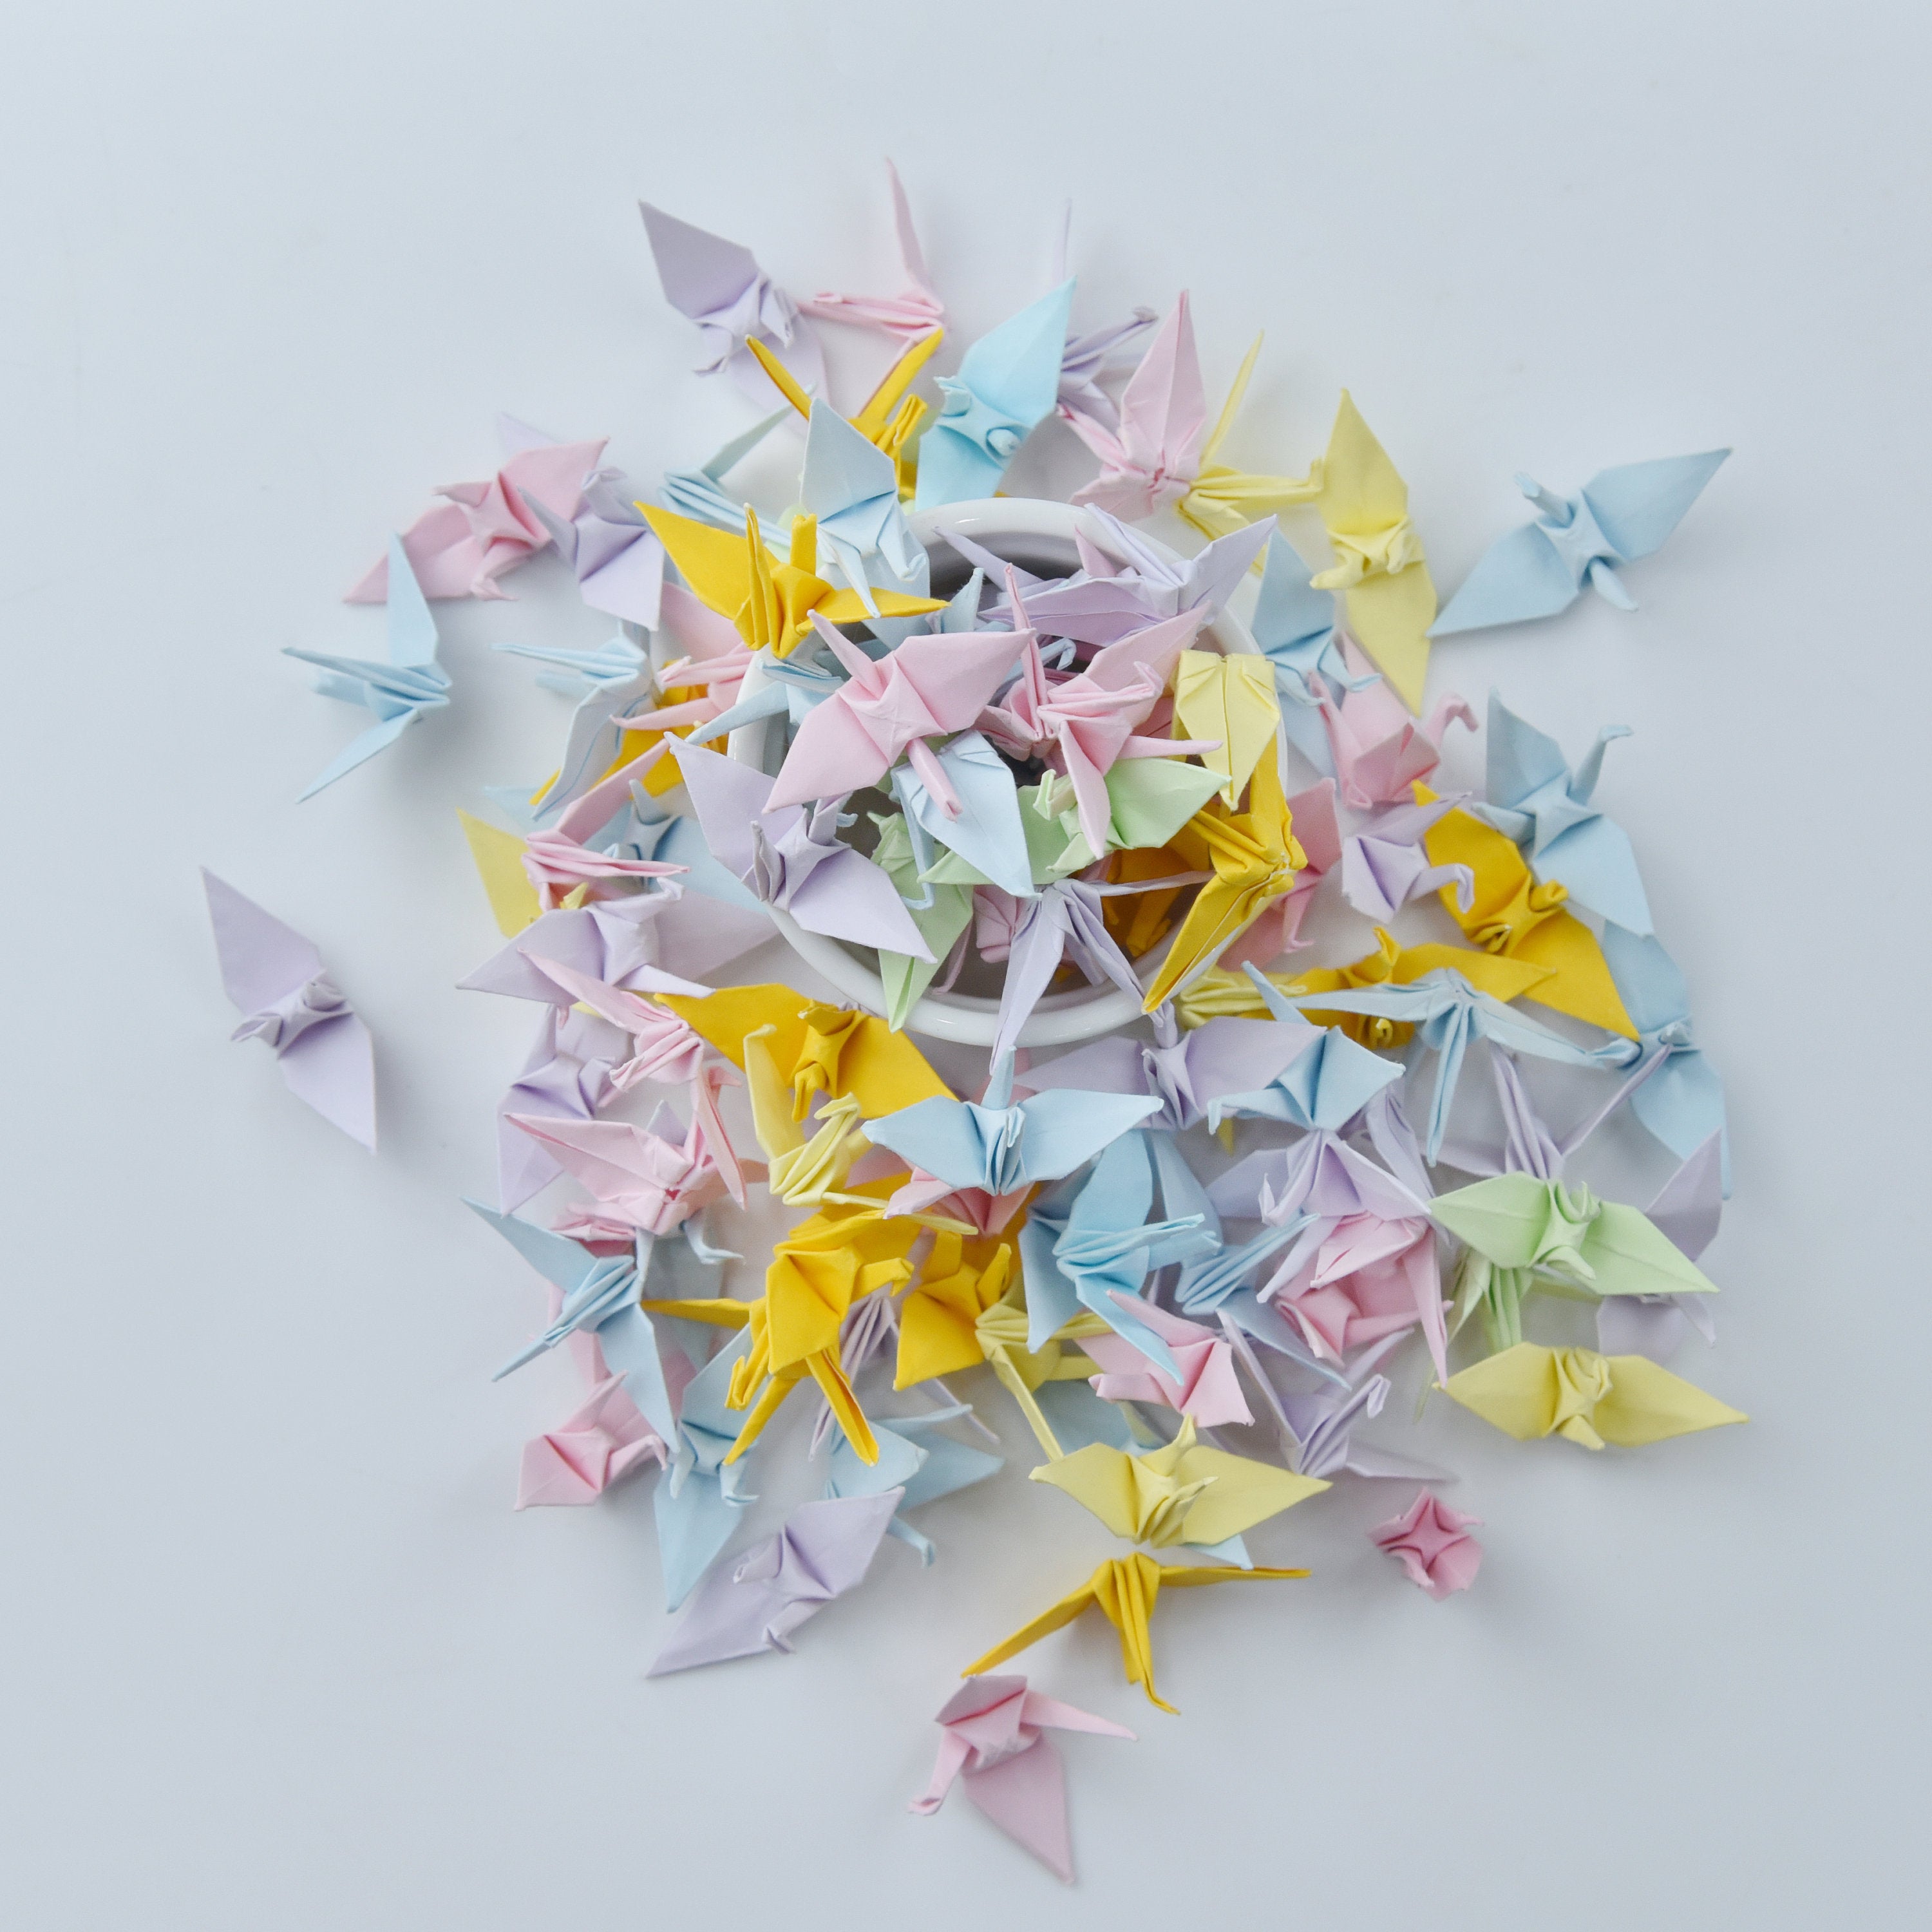 1000 Mixed Color Origami Paper Crane 3.81 cm (1.5 inches) Japanese